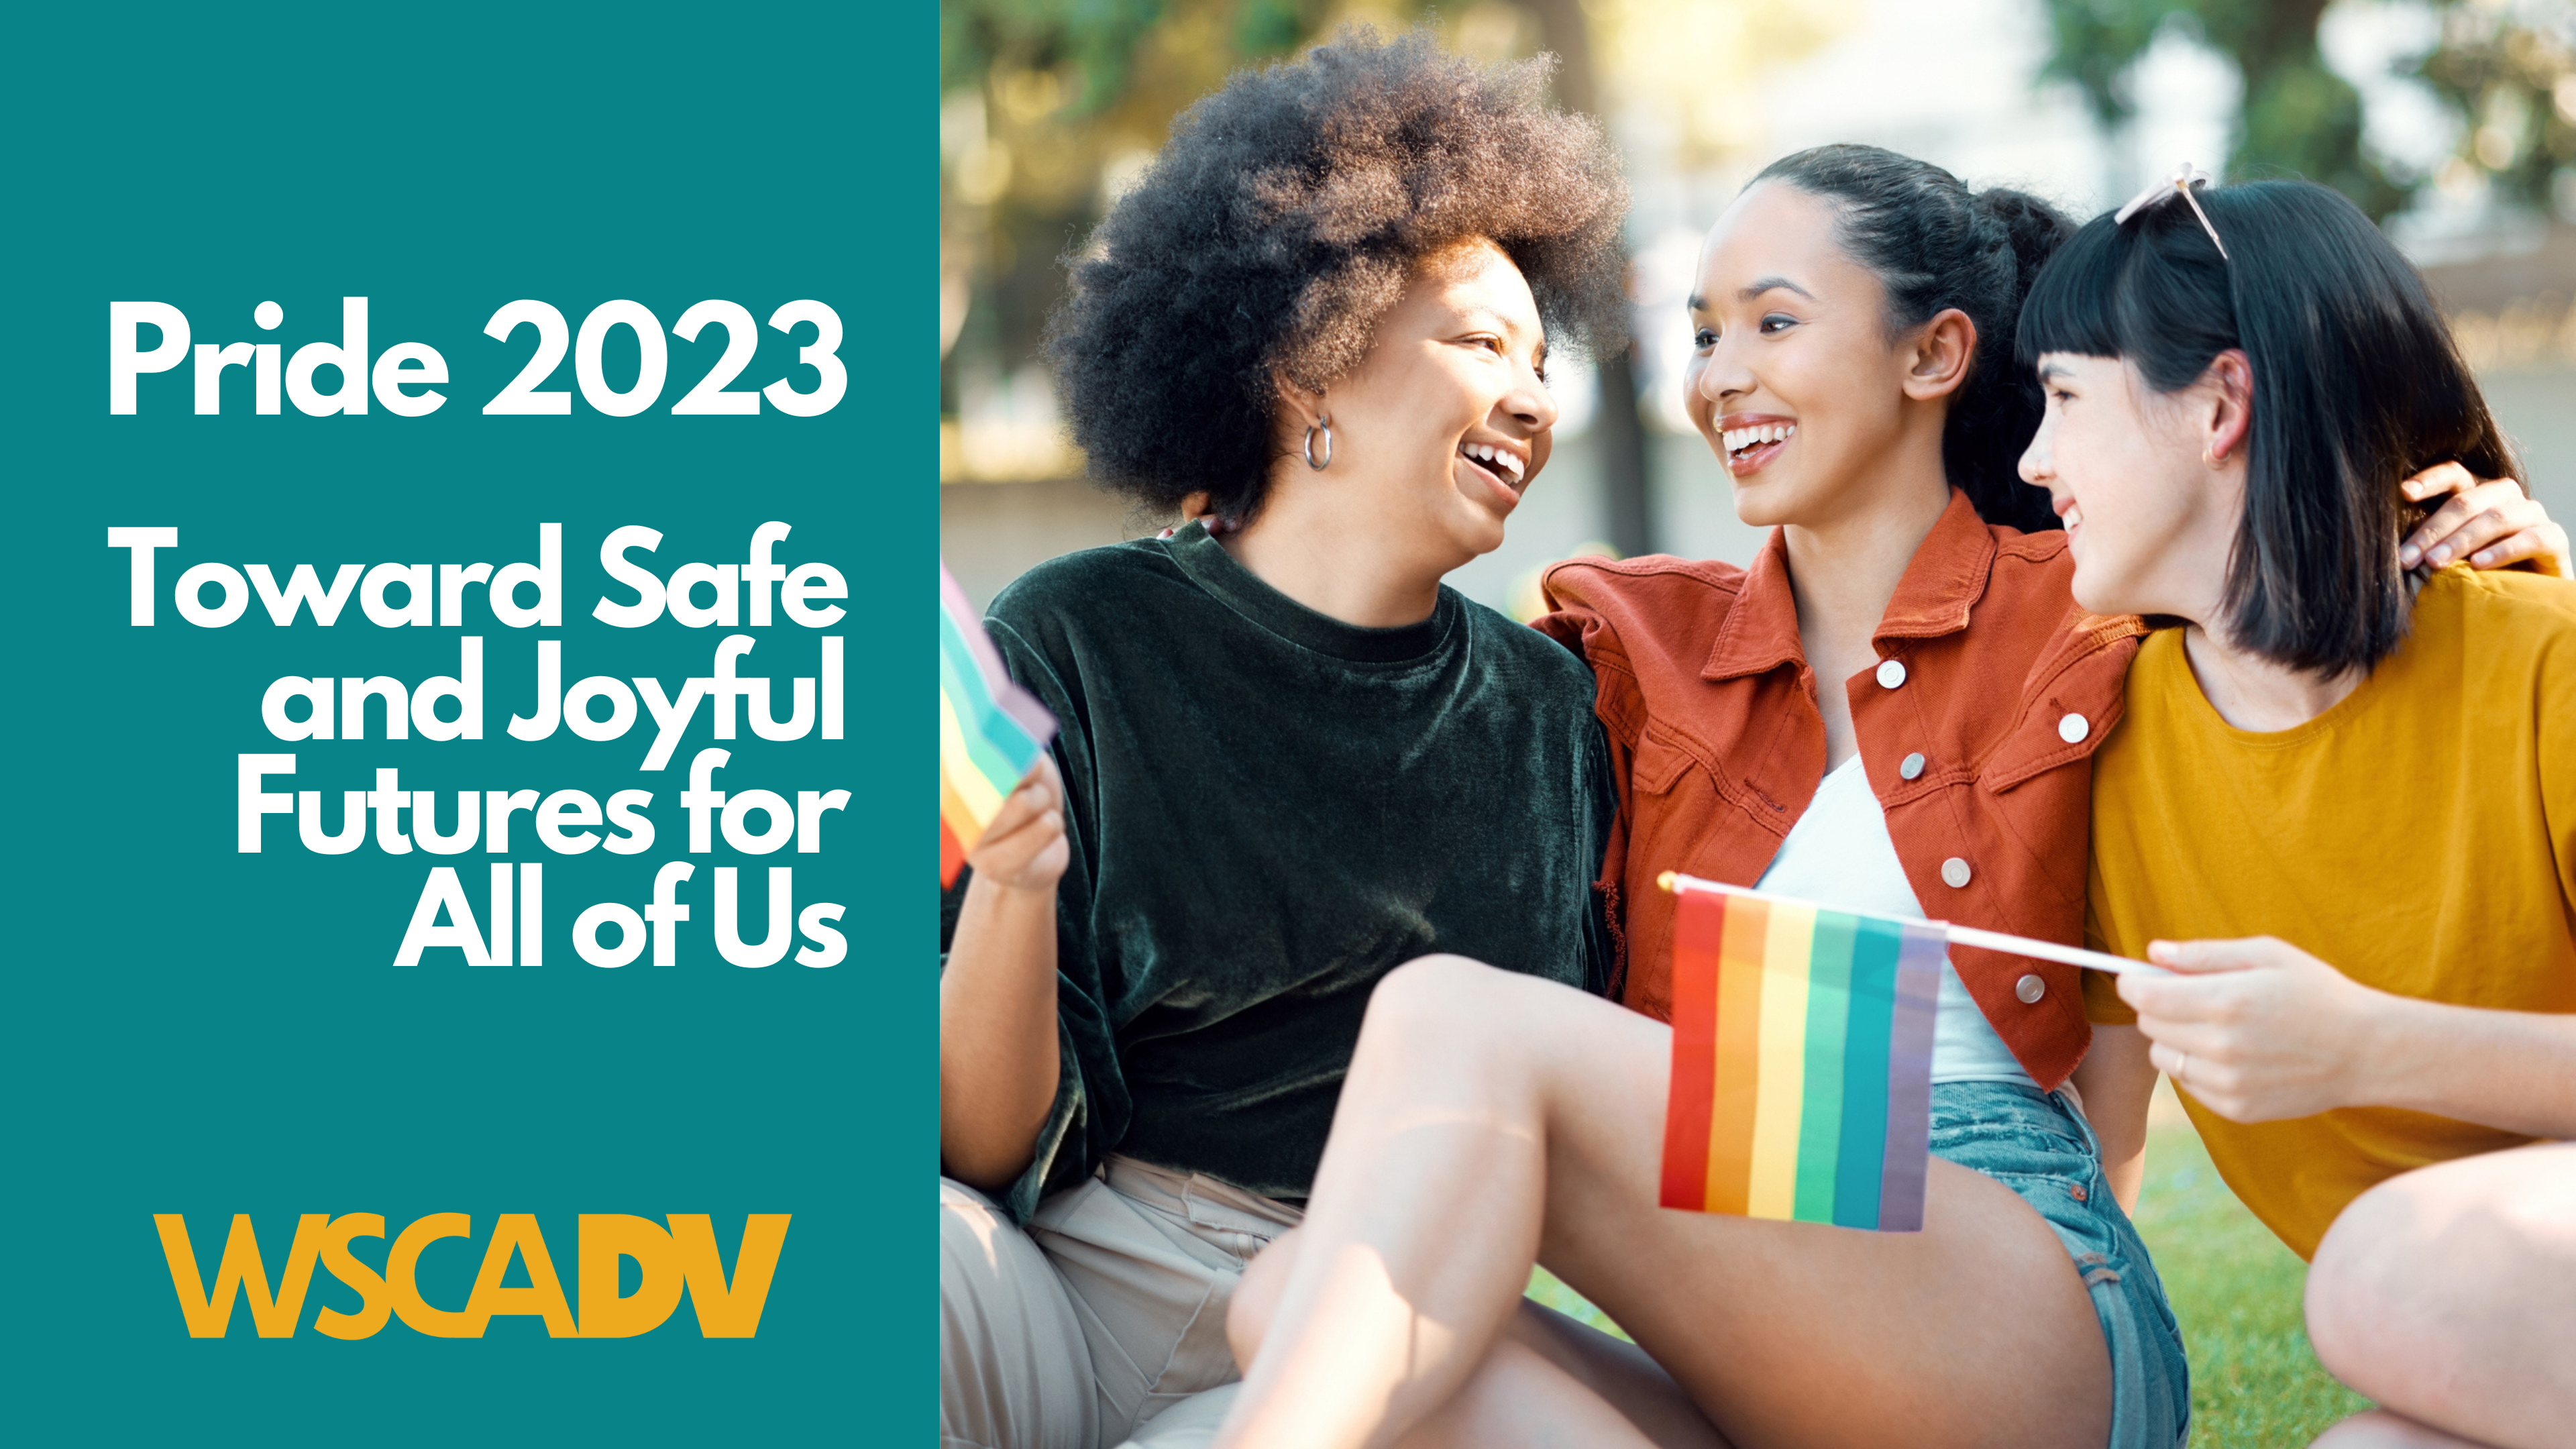 Pride 2023: Toward Safe and Joyful Futures for All of Us